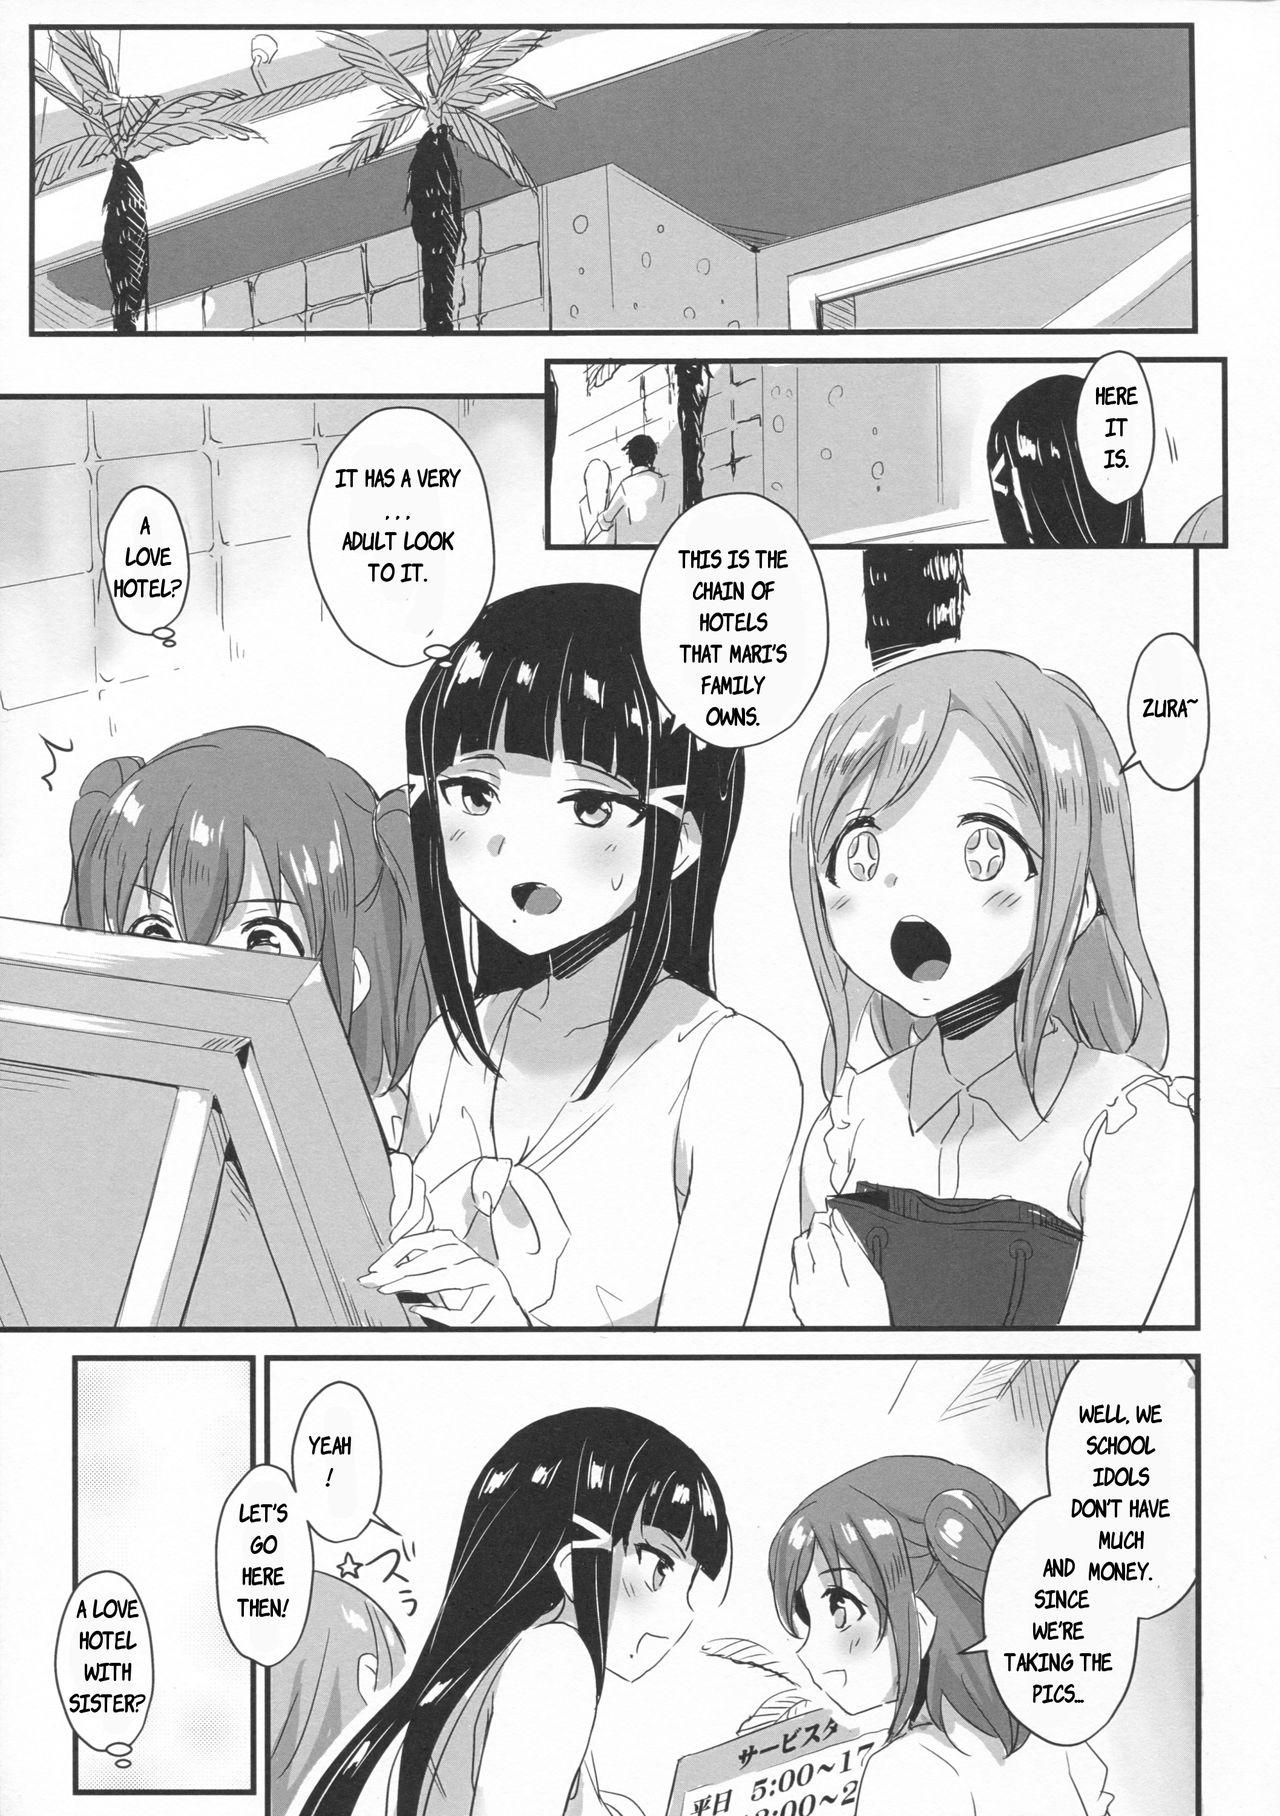 Toys shutter chance!! - Love live sunshine Ass Fetish - Page 4